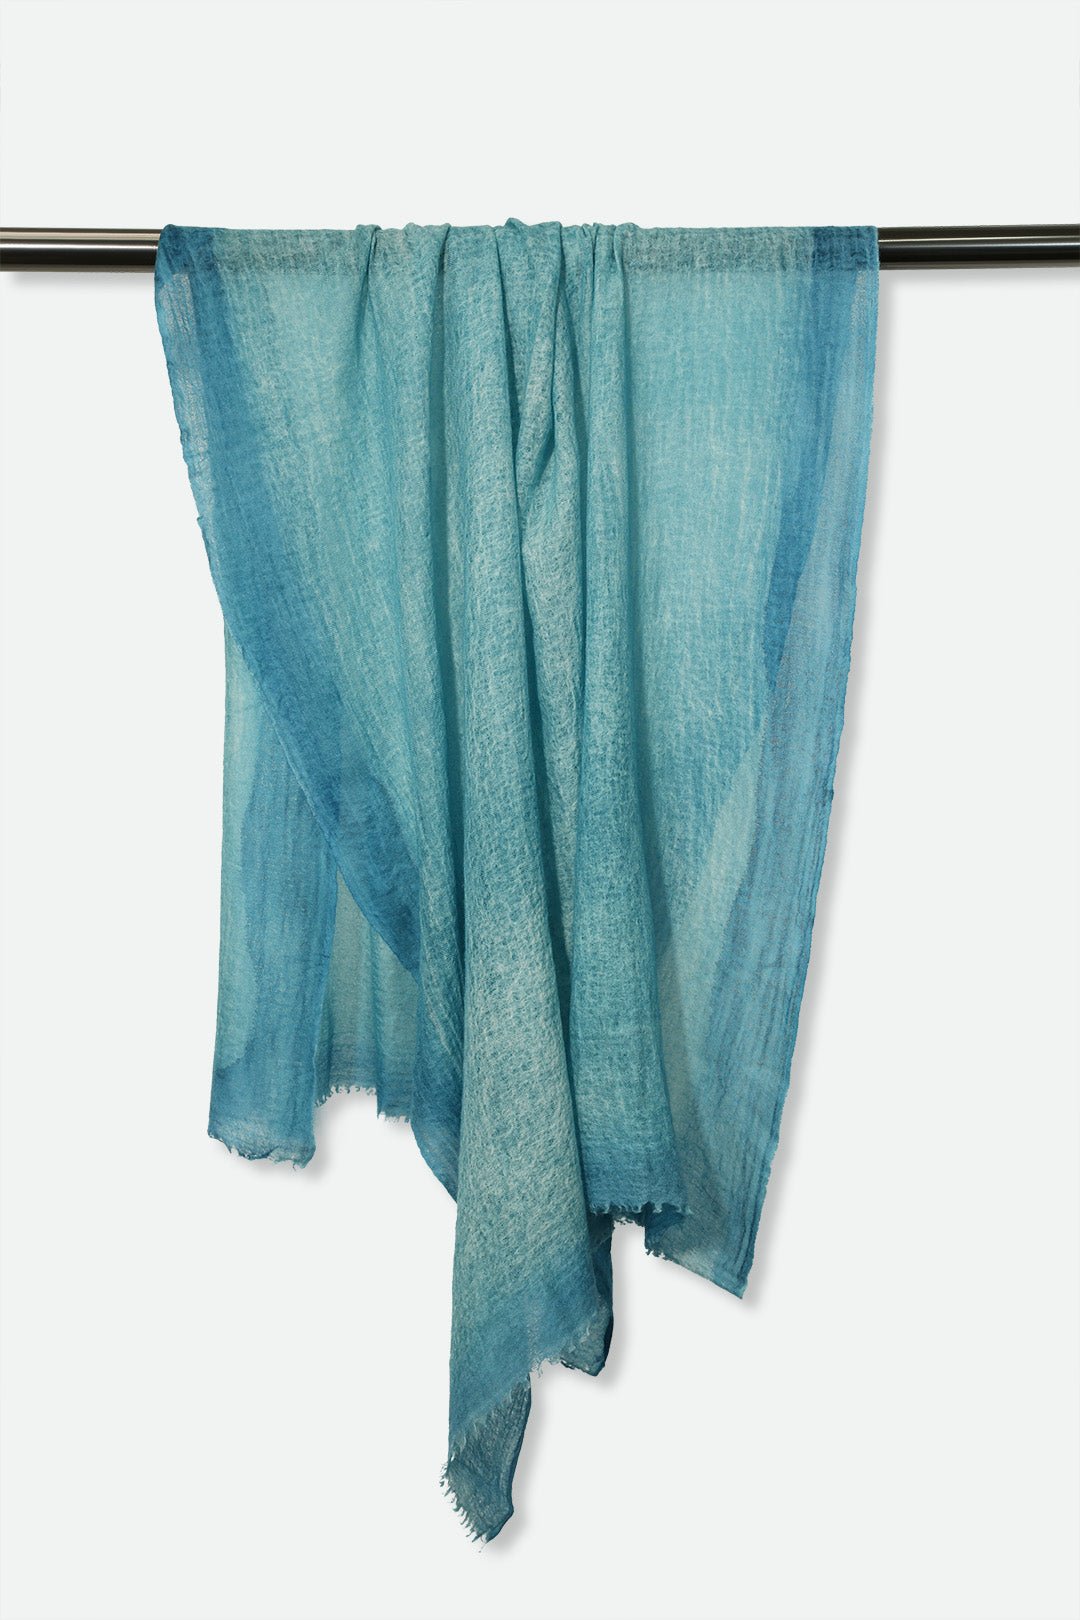 OCEANA BLUE SCARF IN HAND DYED CASHMERE - Jarbo